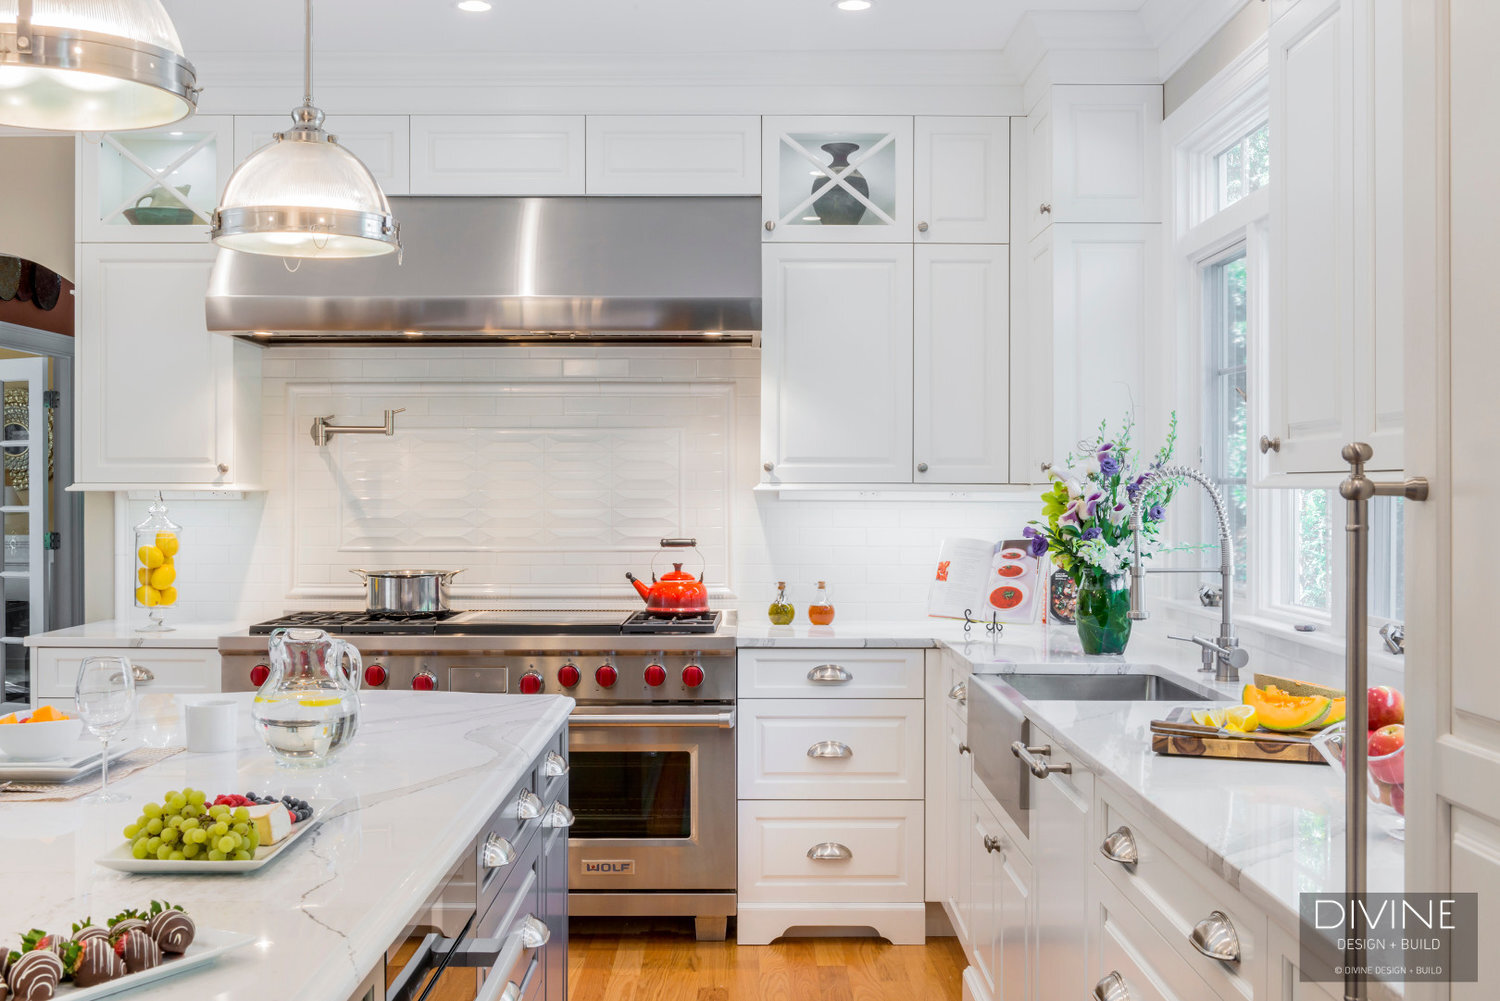  traditional shaker style kitchen. wolf appliances and chrome pendant lights. Calacatta countertops and medium hardwood floors. pull out pantry storage.